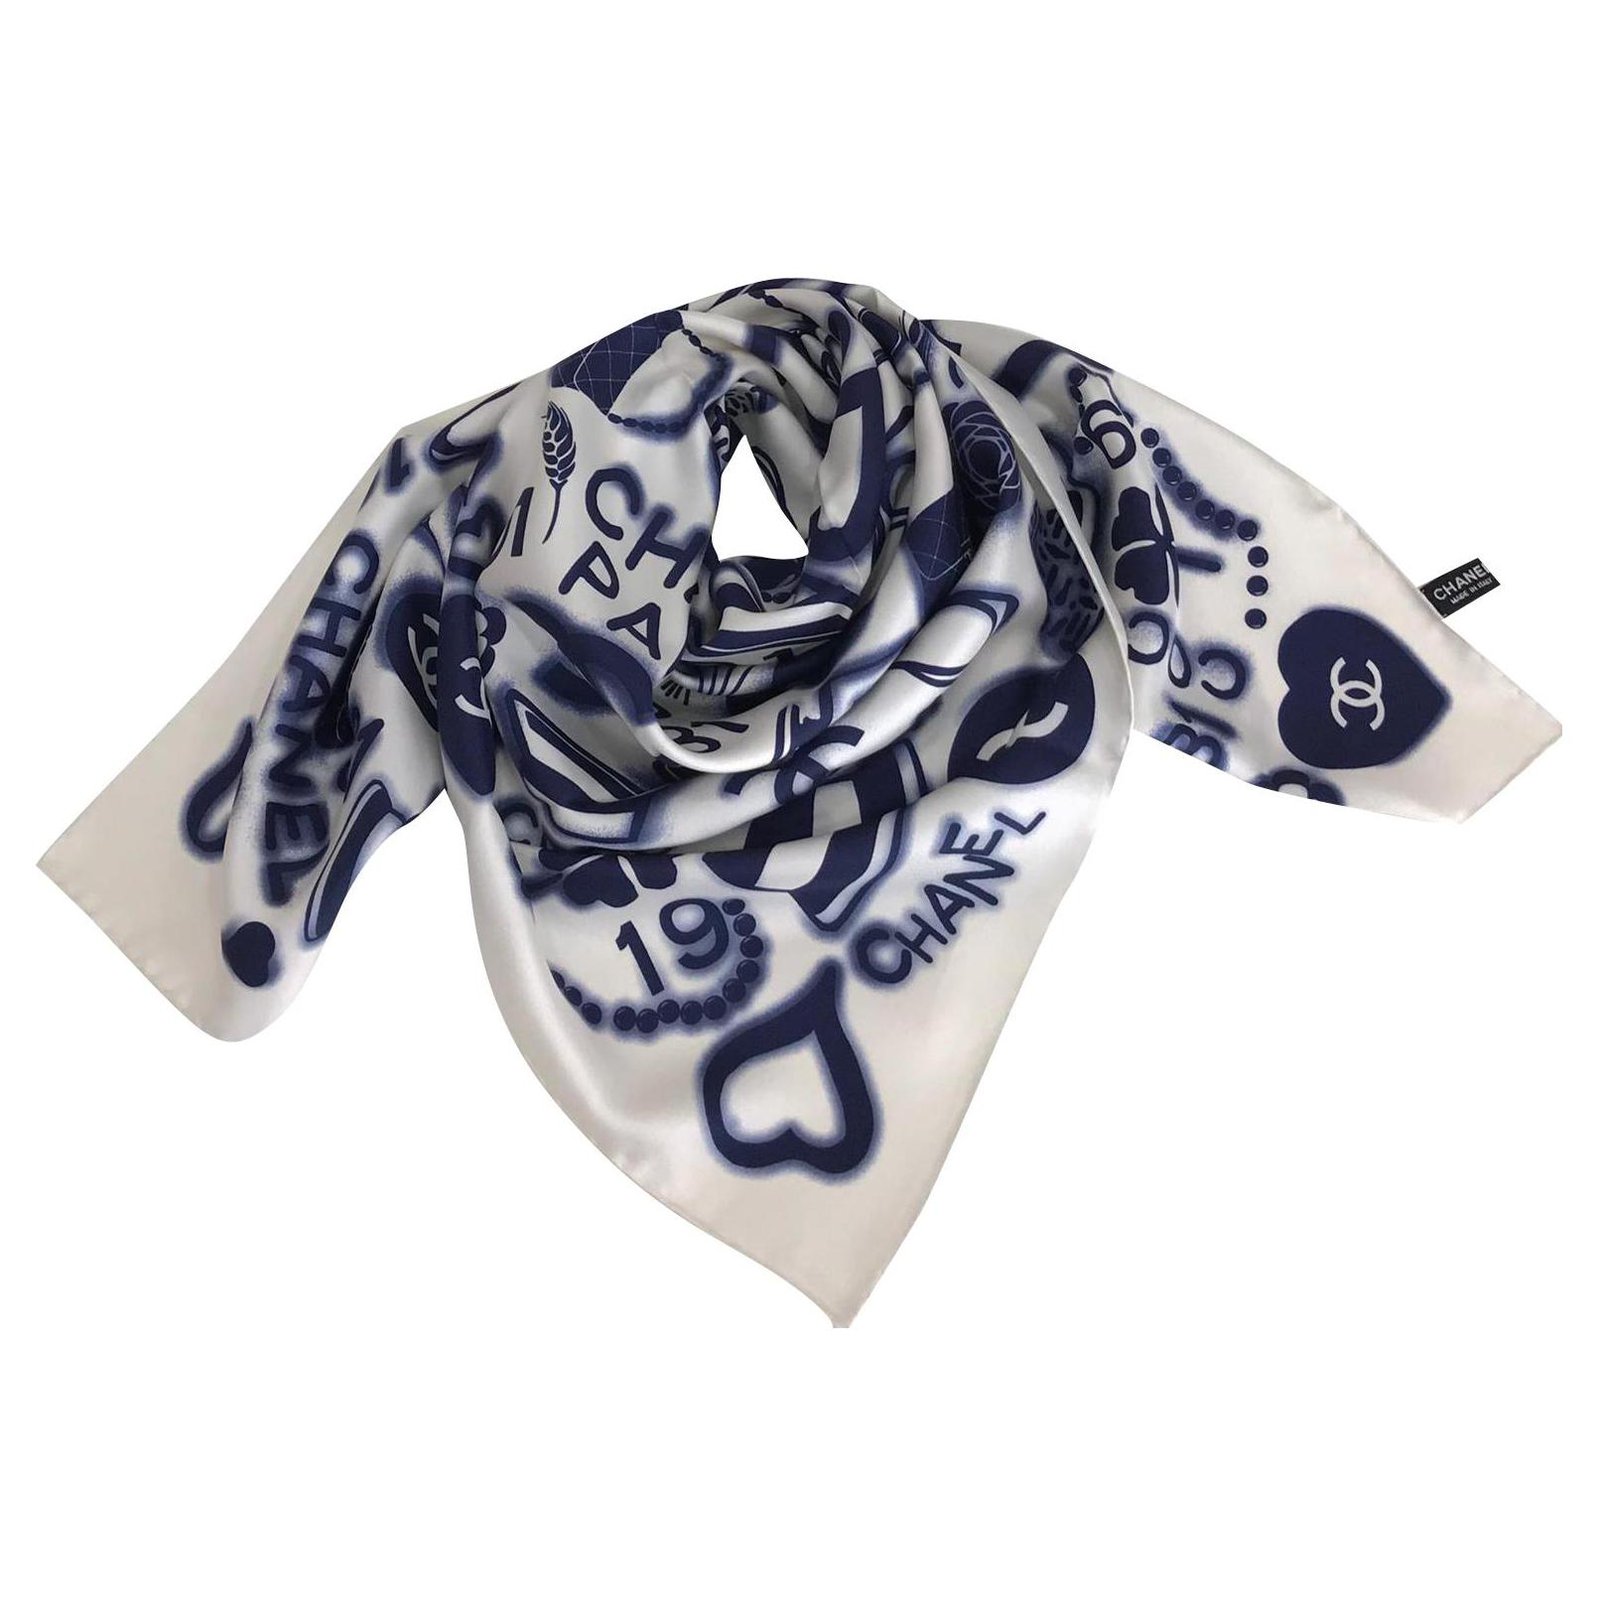 REAL V's FAKE! How To Authenticate A Chanel Silk Scarf - Fashion For Lunch.